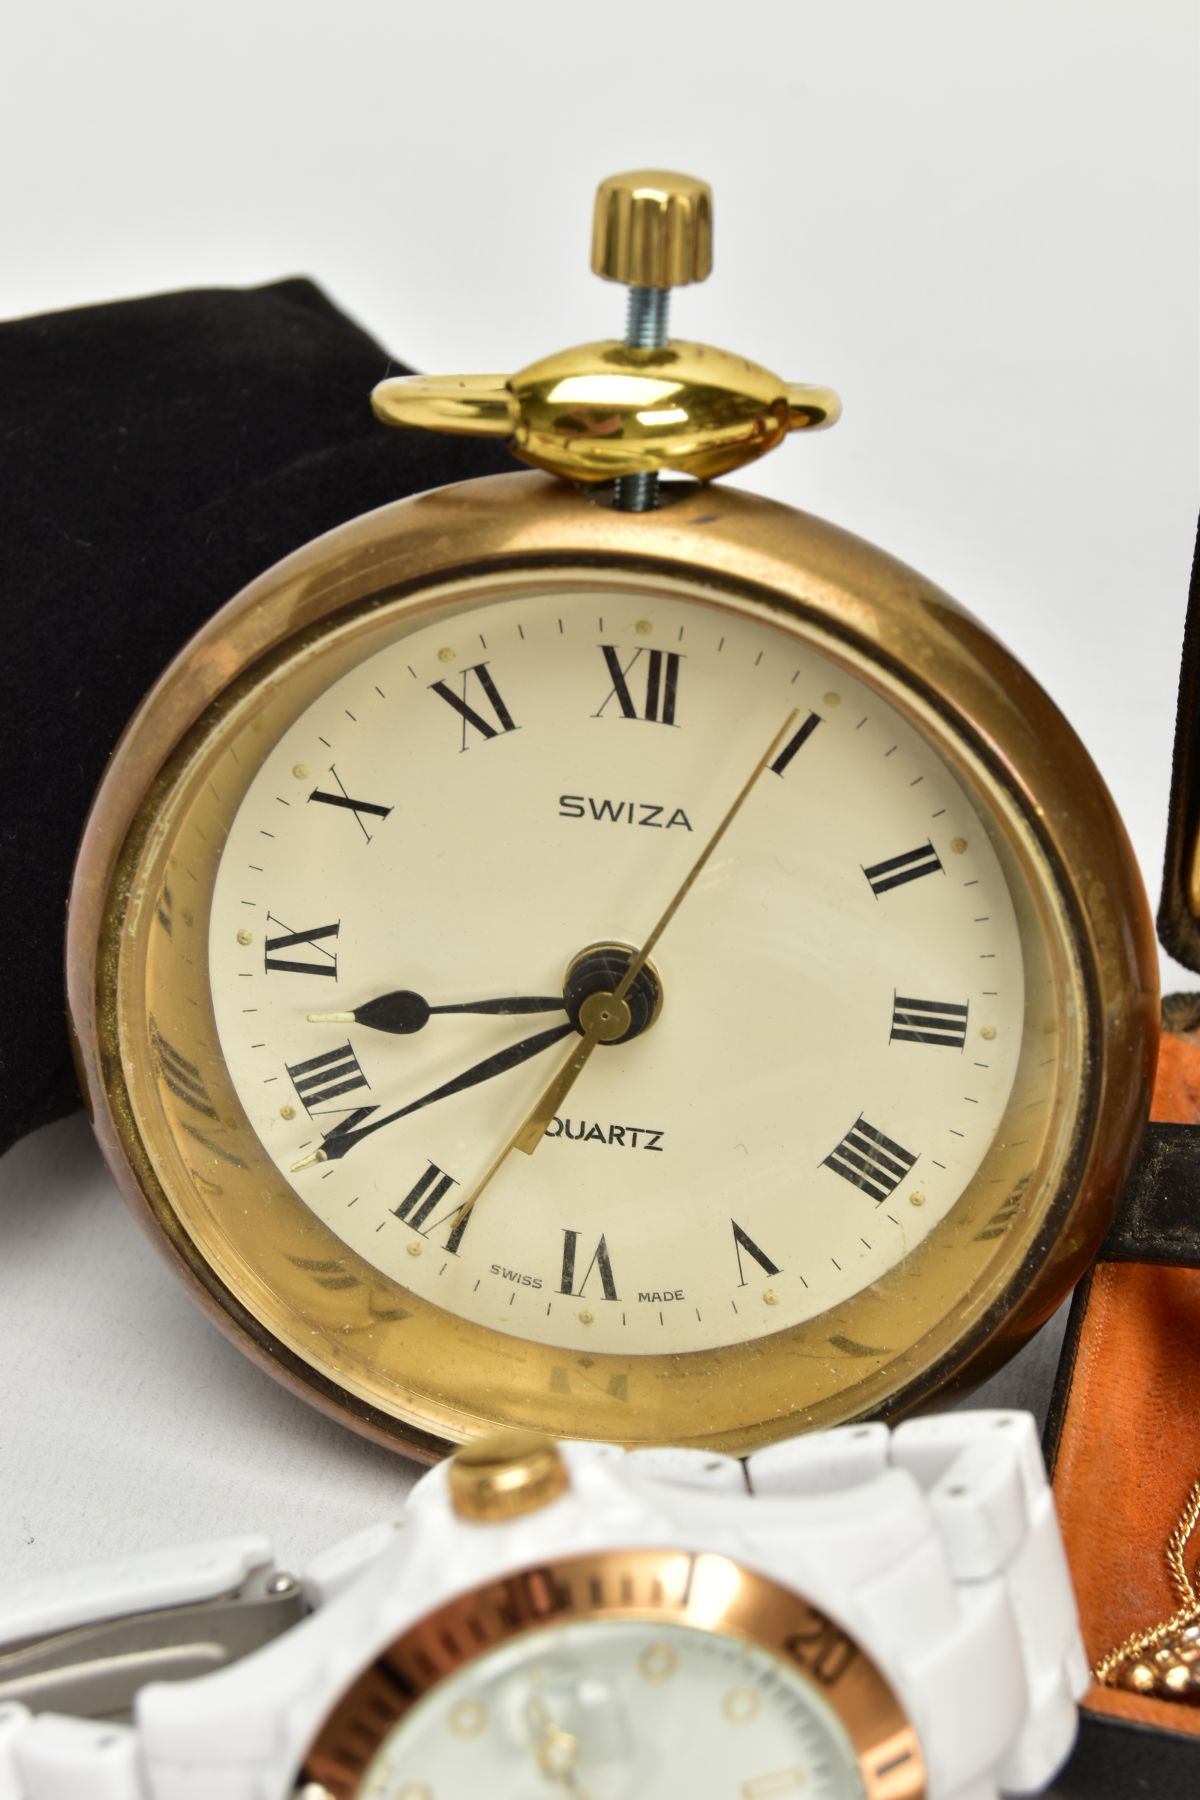 A TISSOT POCKET WATCH AND OTHER ASSORTED ITEMS, a hand wound open face pocket watch, round gold tone - Image 3 of 6